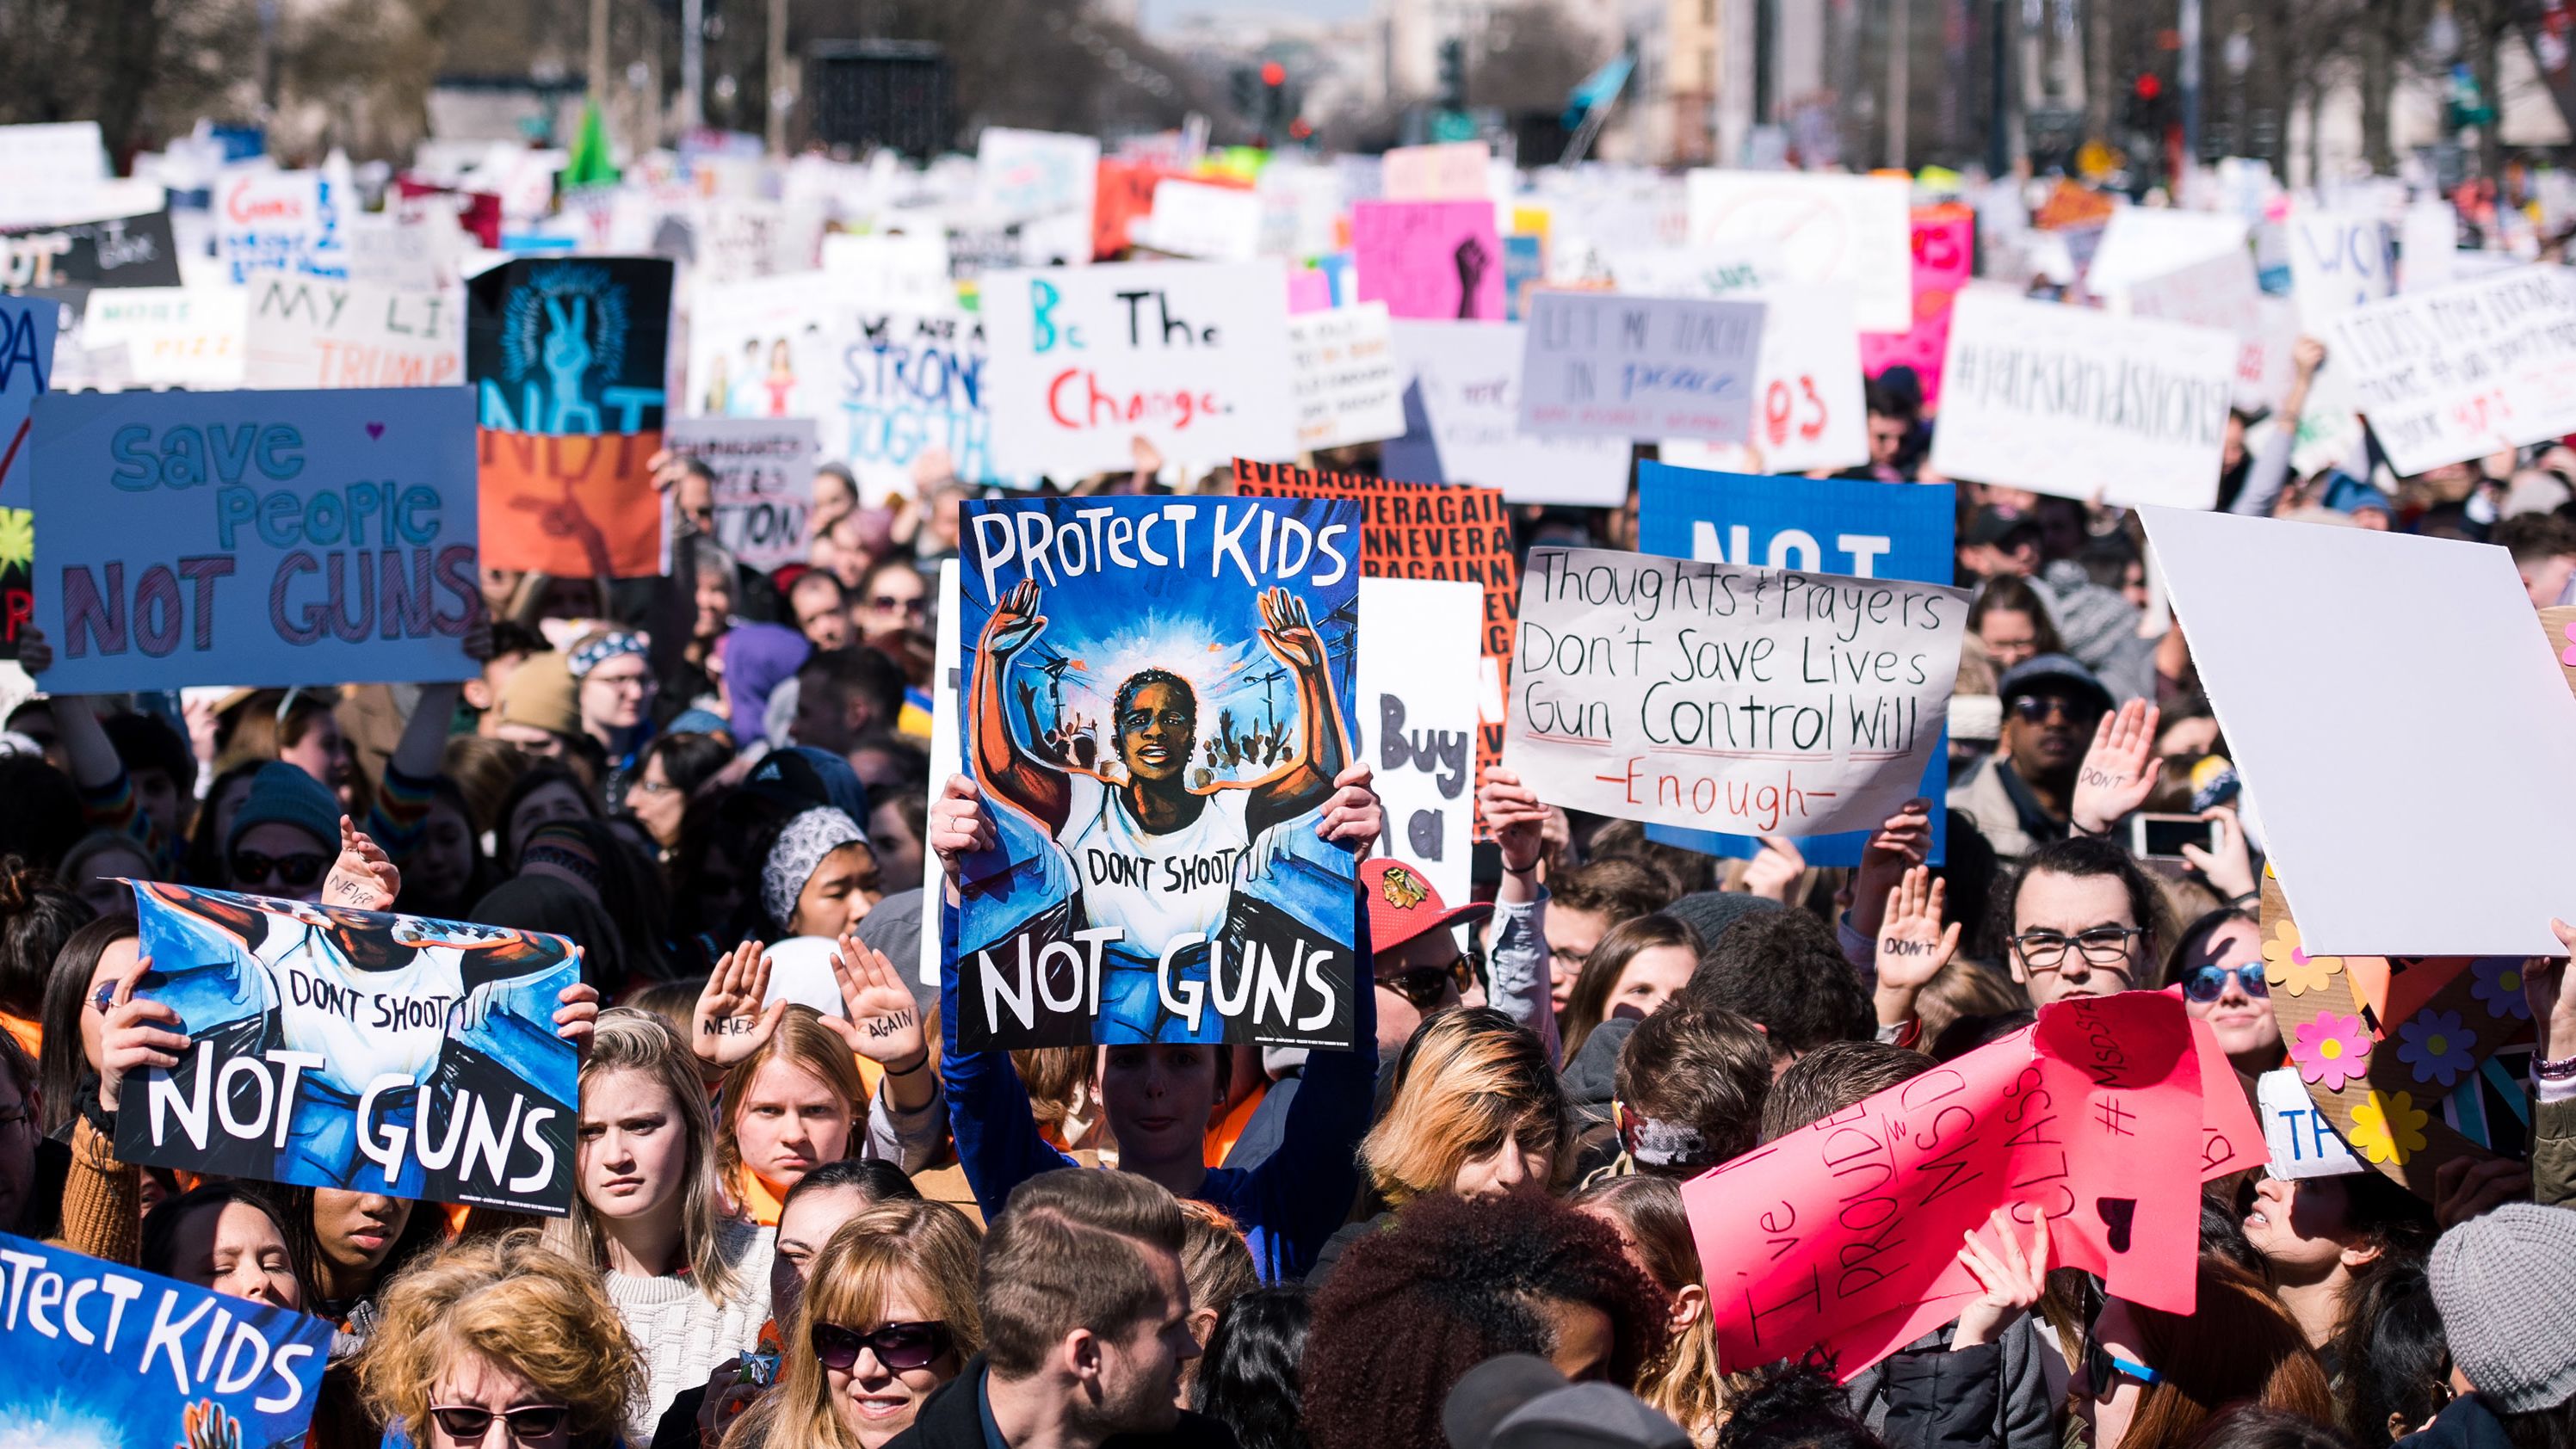 The 2018 March for our Lives drew thousands of young Americans to Washington to protest gun violence.